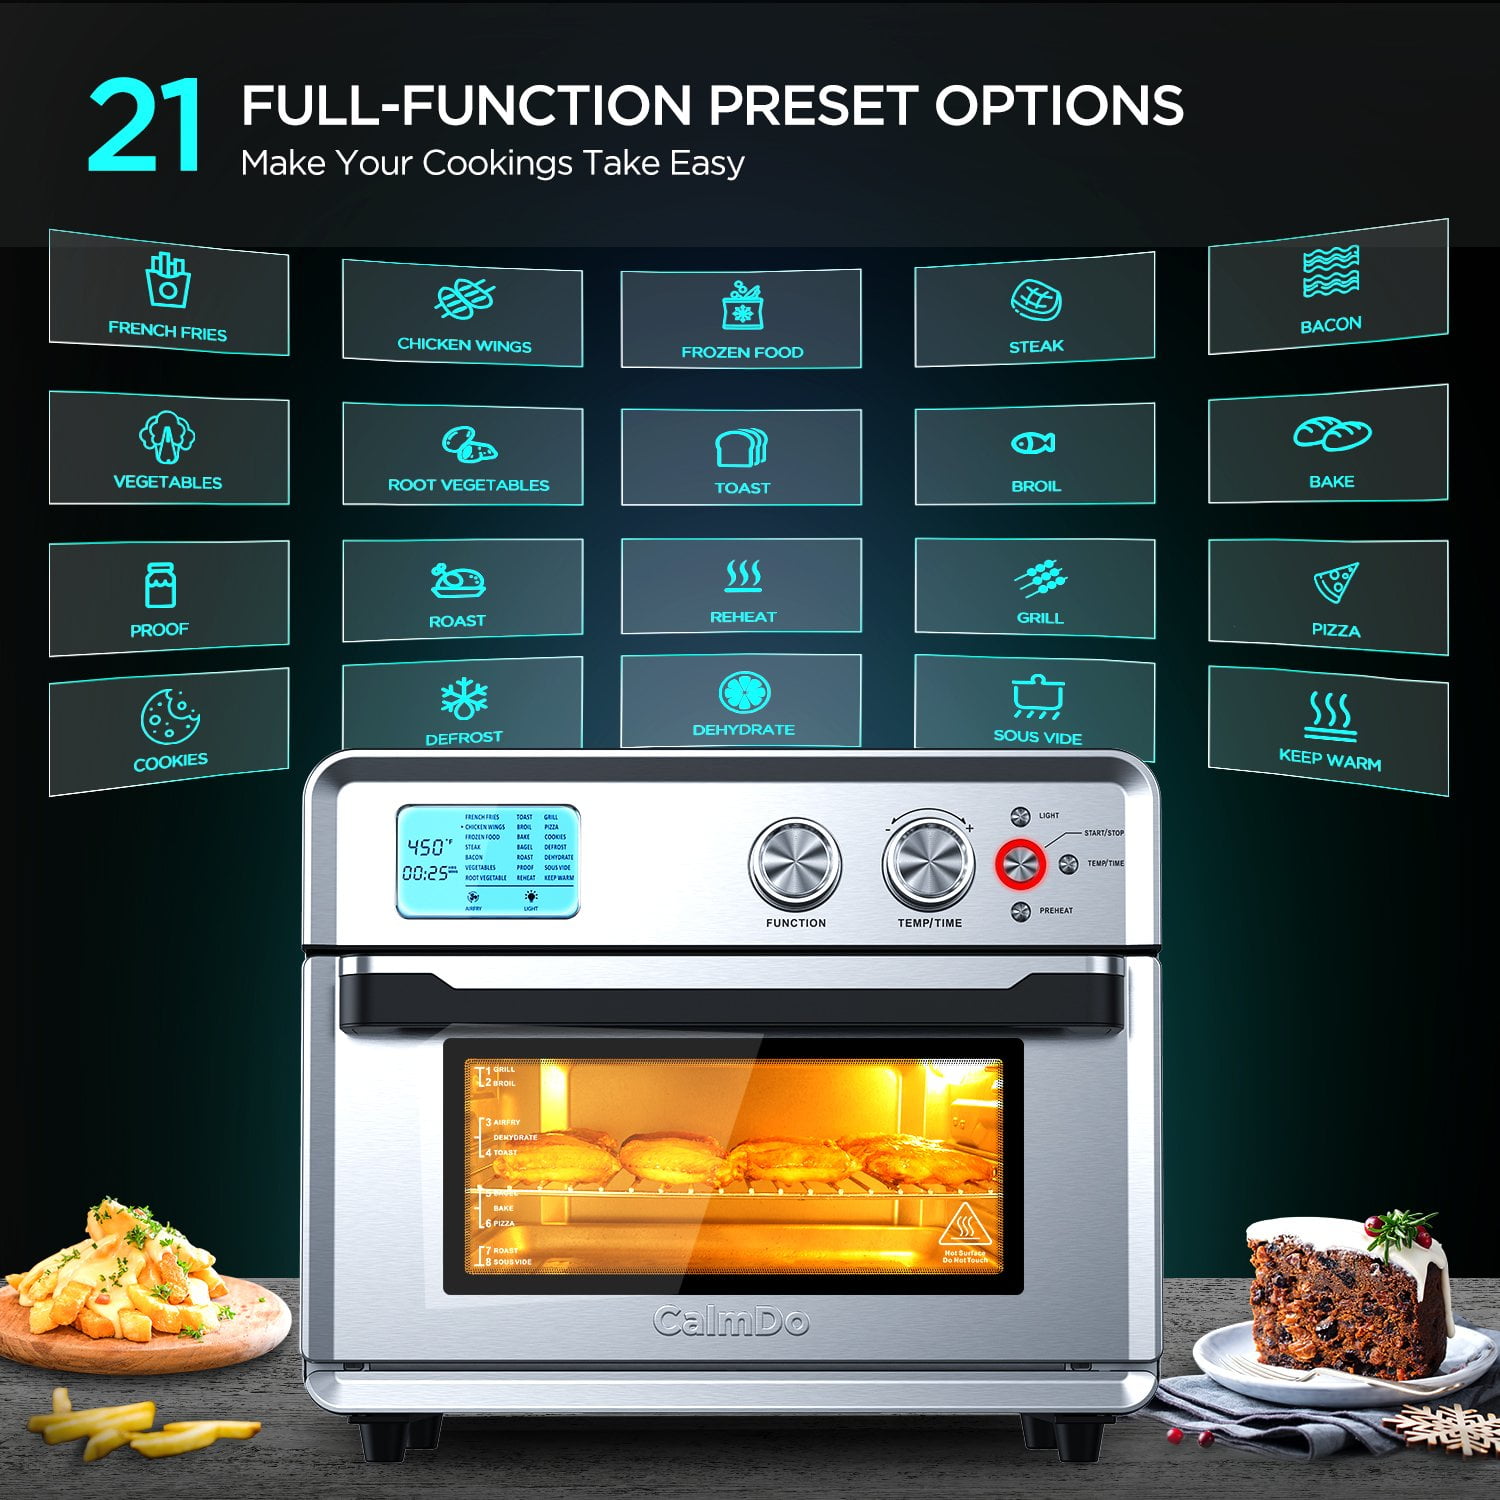 Toaster Oven Air Fryer Combo,DAWAD 19QT Countertop Convection Oven for  Fries, Pizza, Chicken, Cake, Cookies, 4 Accessories & 33 Original Recipes,  Easy for Sale in Bakersfield, CA - OfferUp